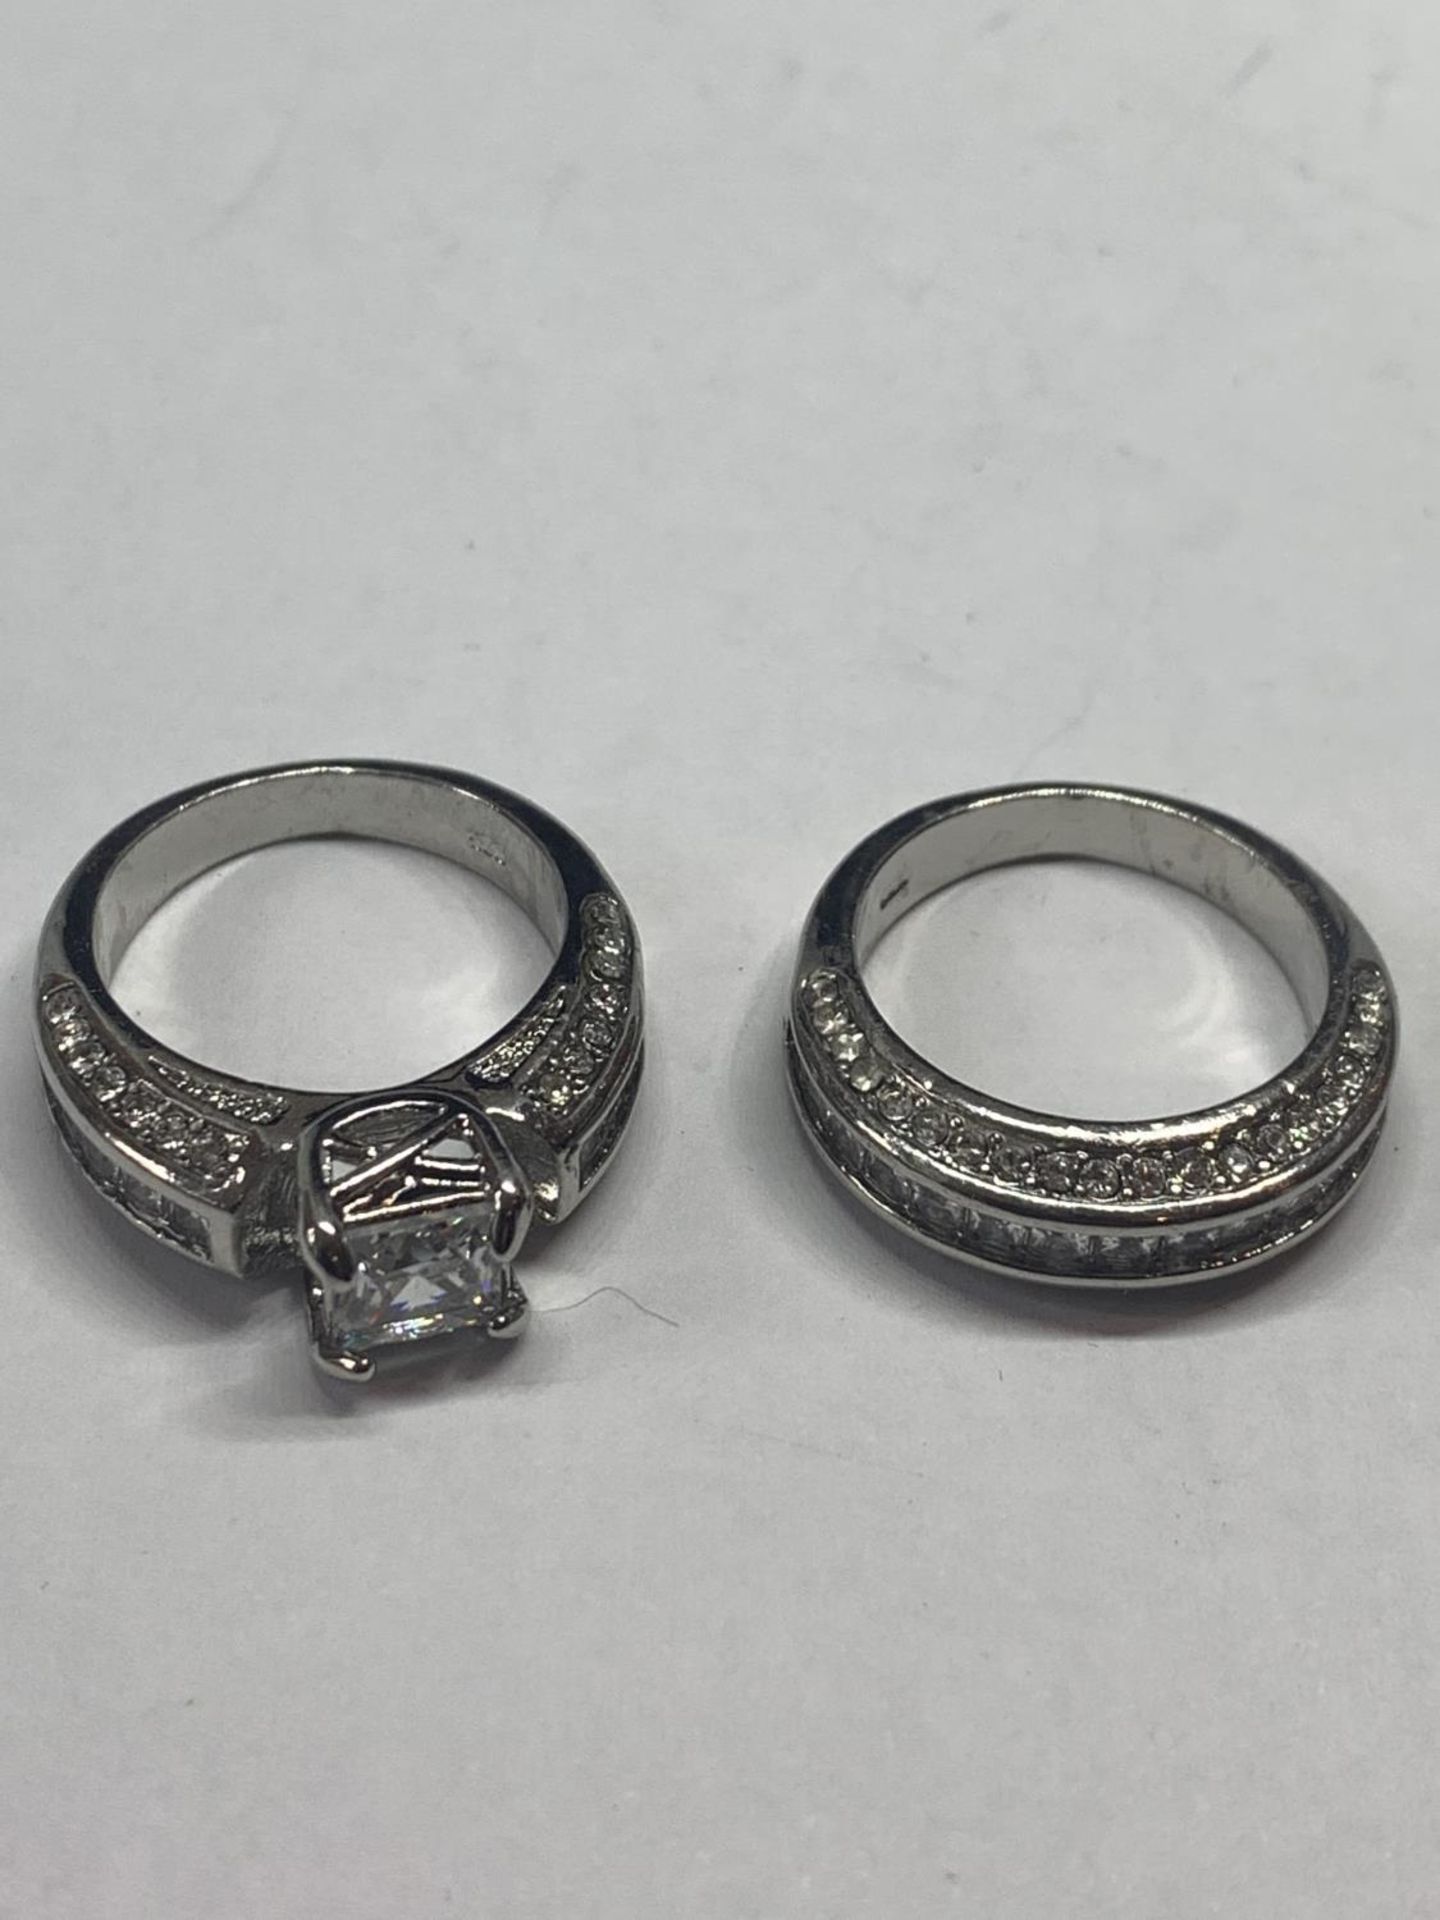 TWO MARKED 925 SILVER RINGS WITH CLEAR STONES ONE WITH A SOLITAIRE SIZE N IN A PRESENTATION BOX - Image 2 of 3